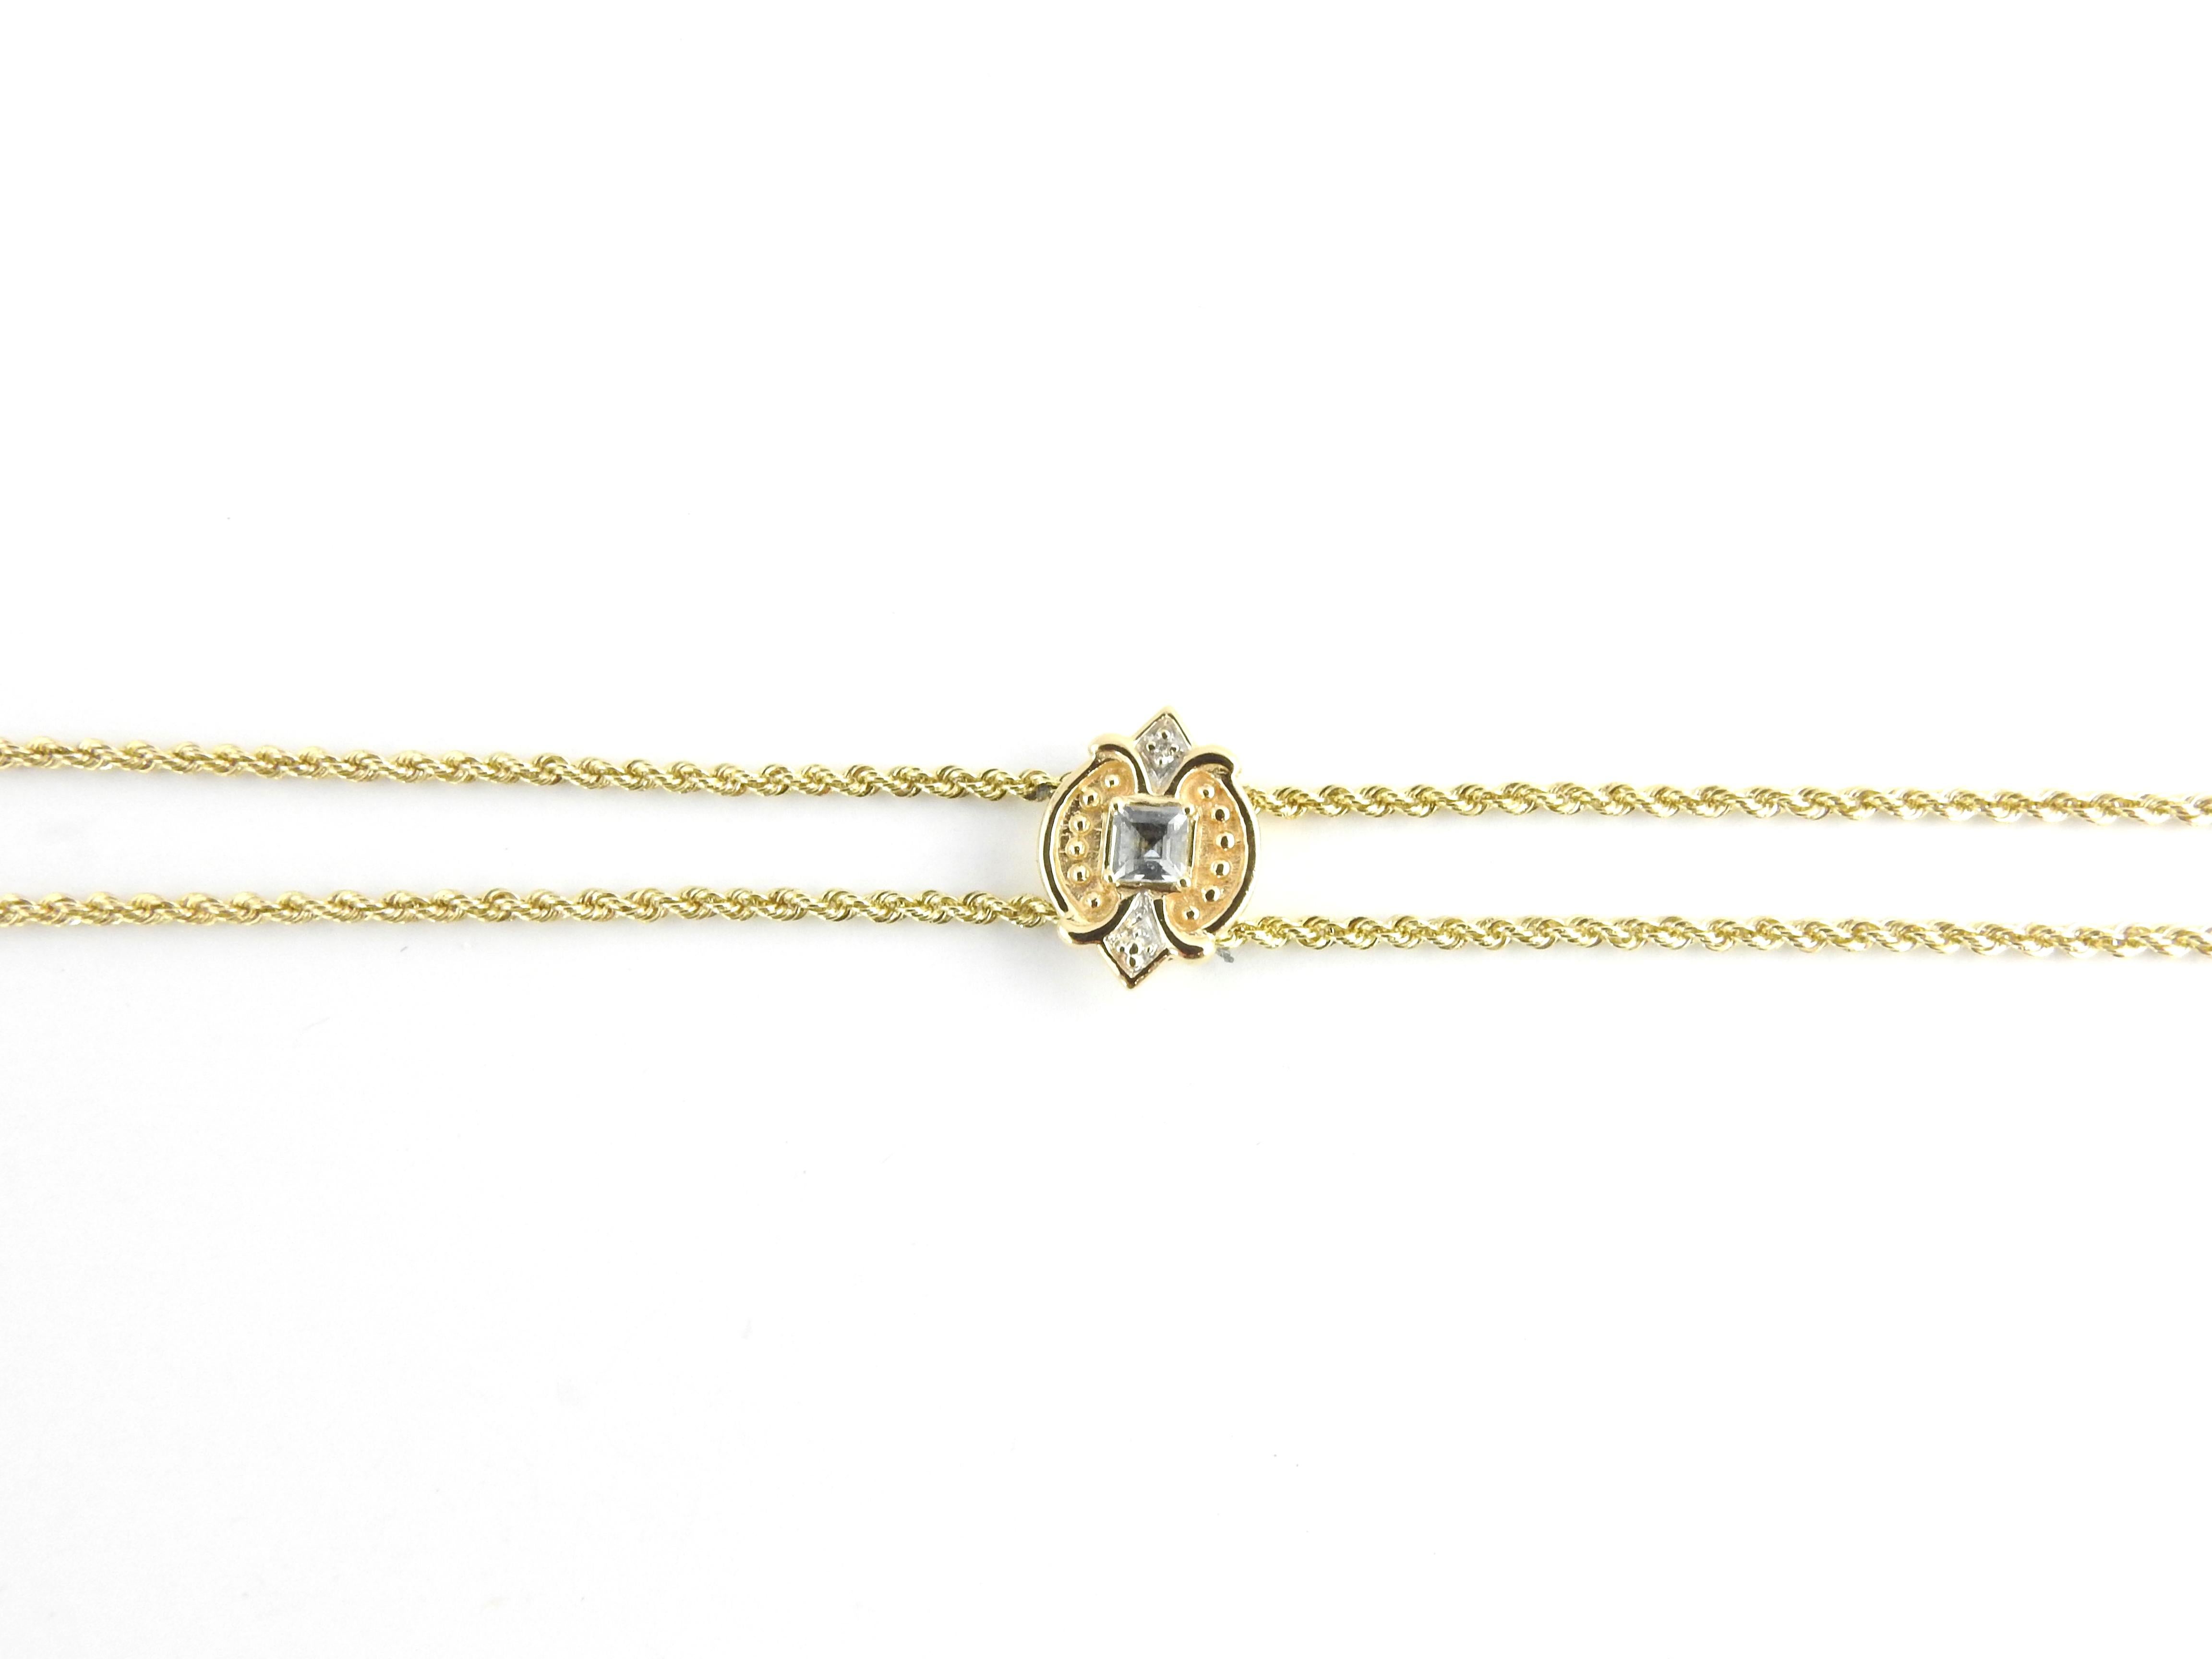 Vintage 14 Karat Yellow Gold Aquamarine and Diamond Bracelet-

This elegant bracelet features one square aquamarine (4 mm x 4 mm) and one round single cut diamond set in beautifully detailed 14K yellow gold on a classic double rope bracelet. Top of